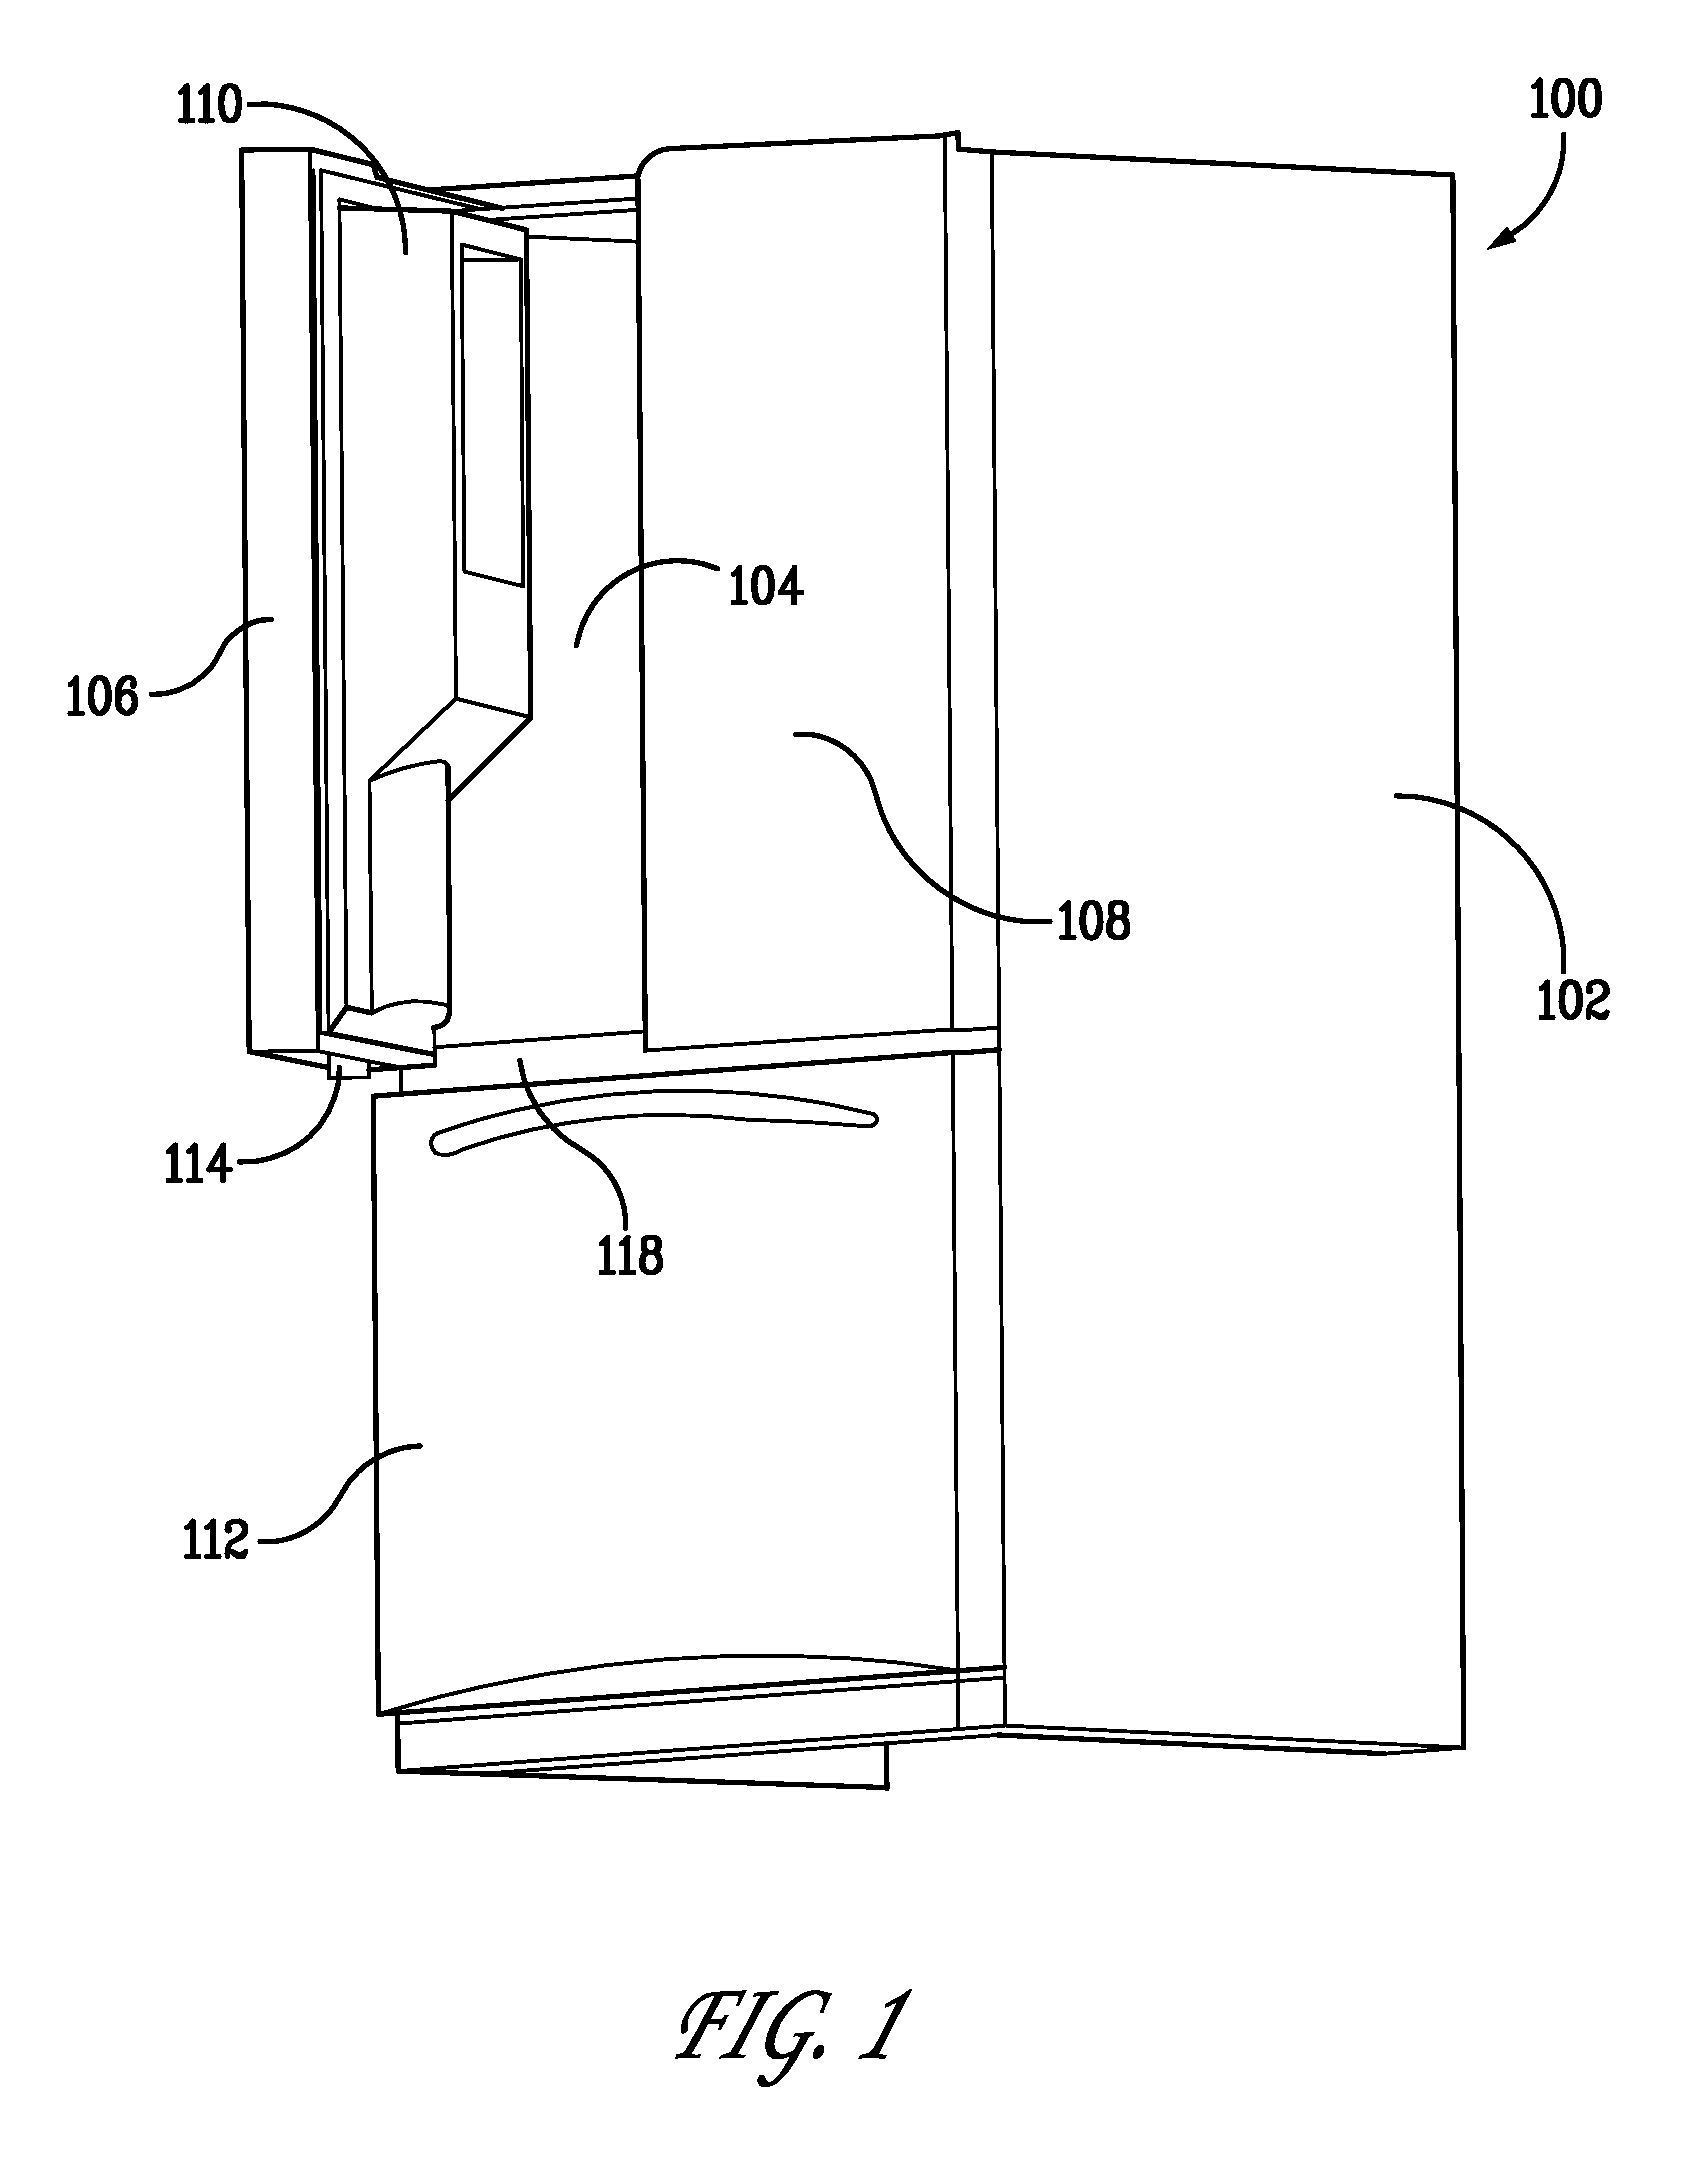 In-door fluid drainage system for a refrigerator